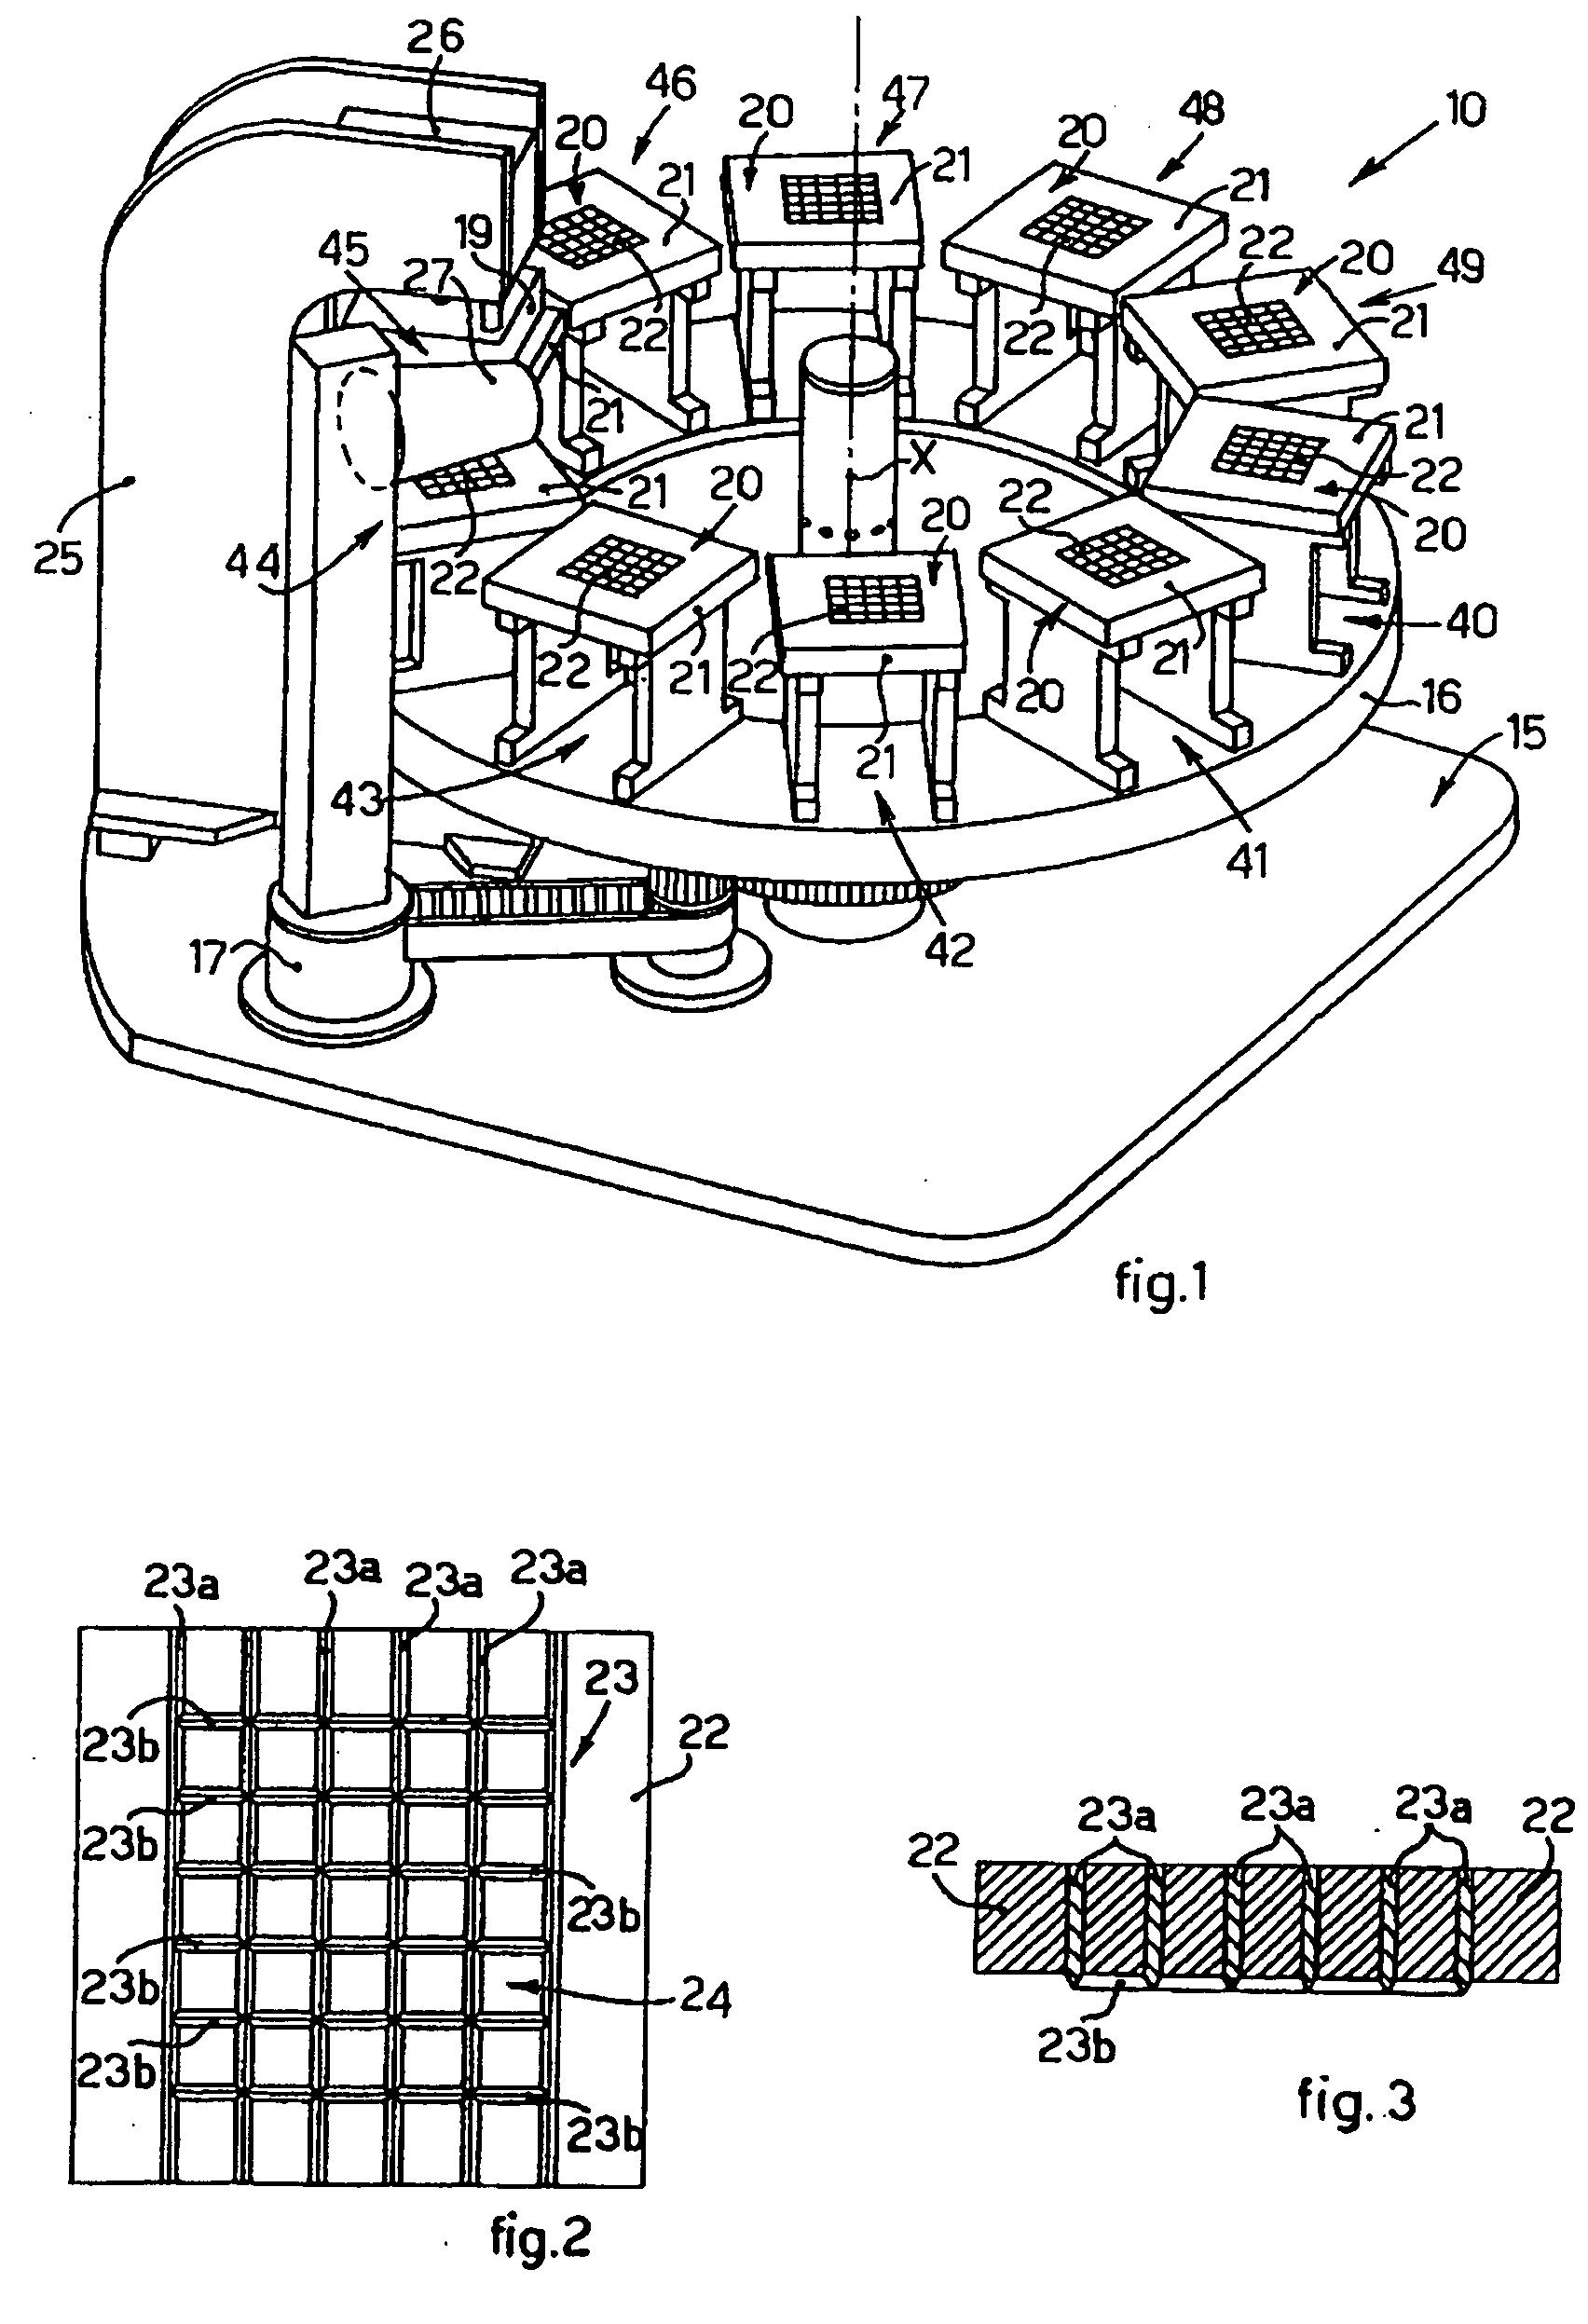 Method to produce tesserae of glass mosaic containing a metal foil